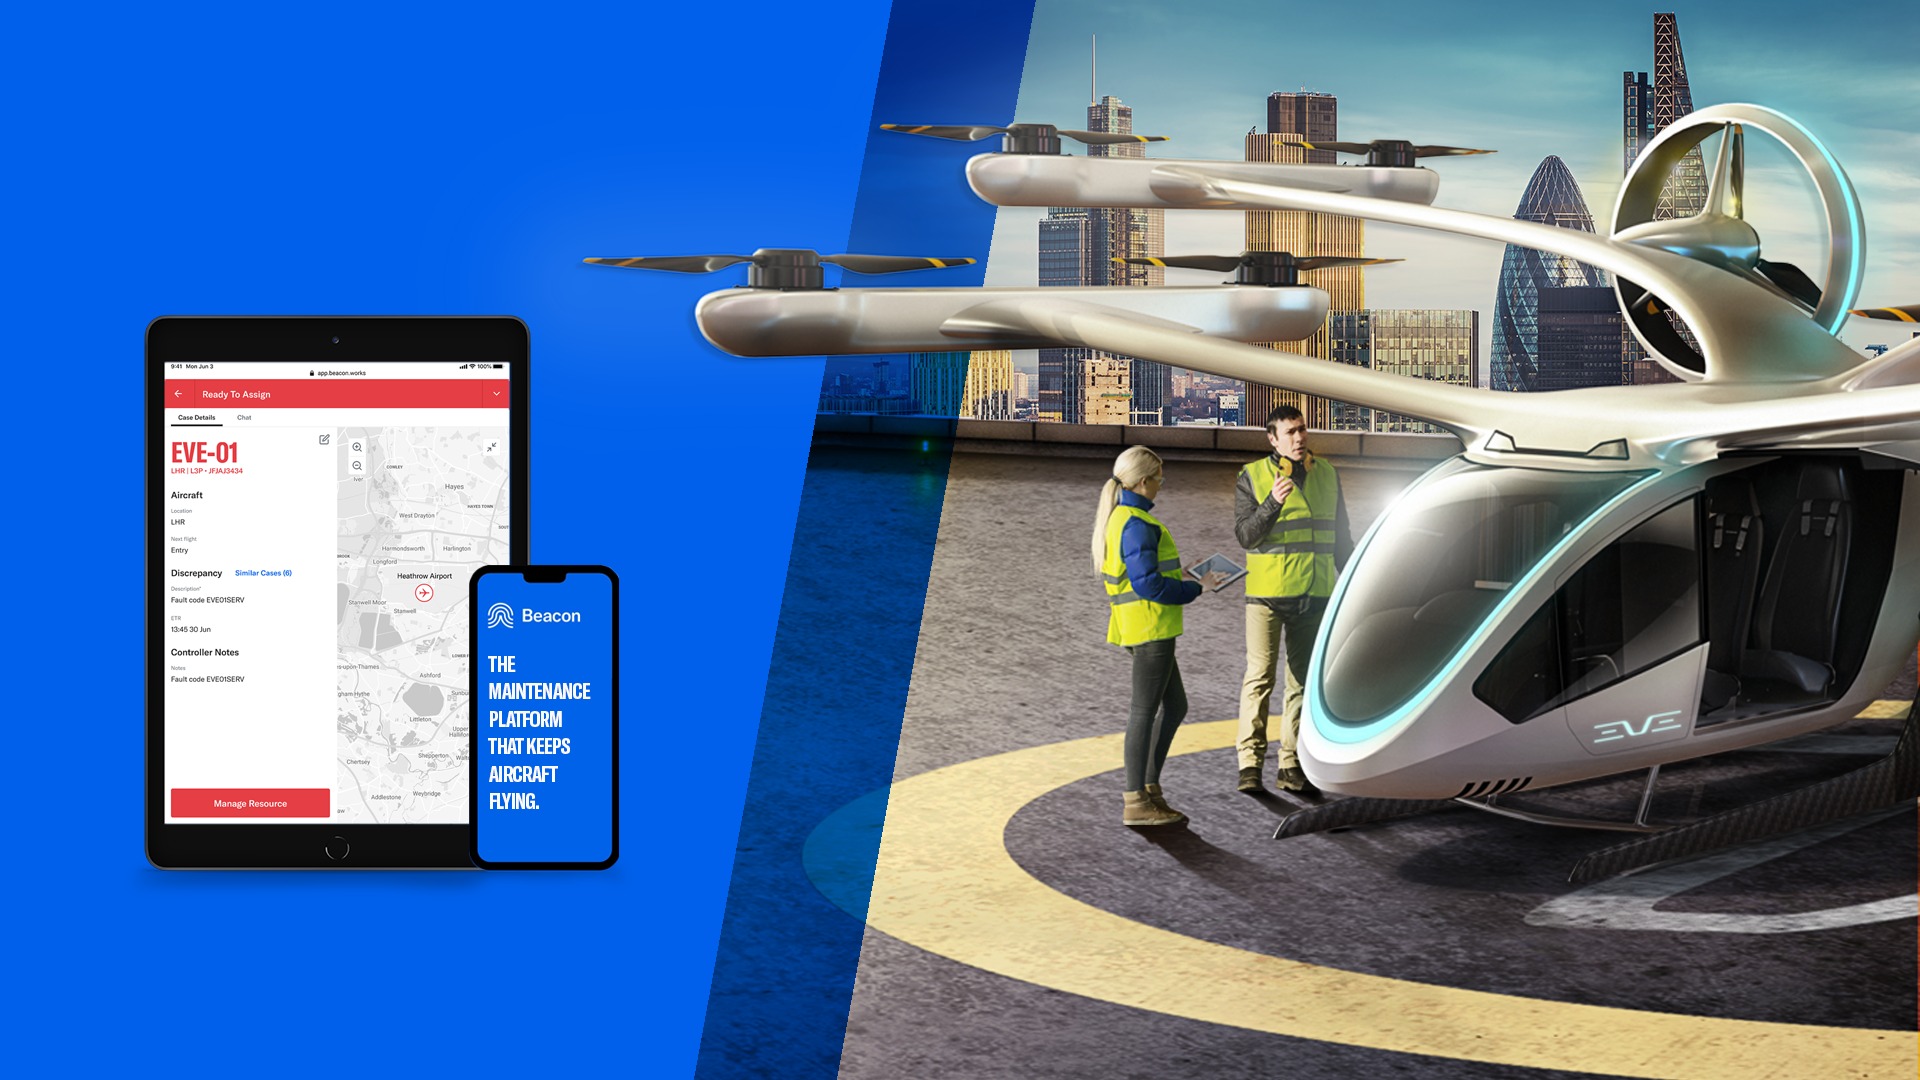 Eve Urban Air Mobility Announces Cooperation with Beacon‘s maintenance platform.